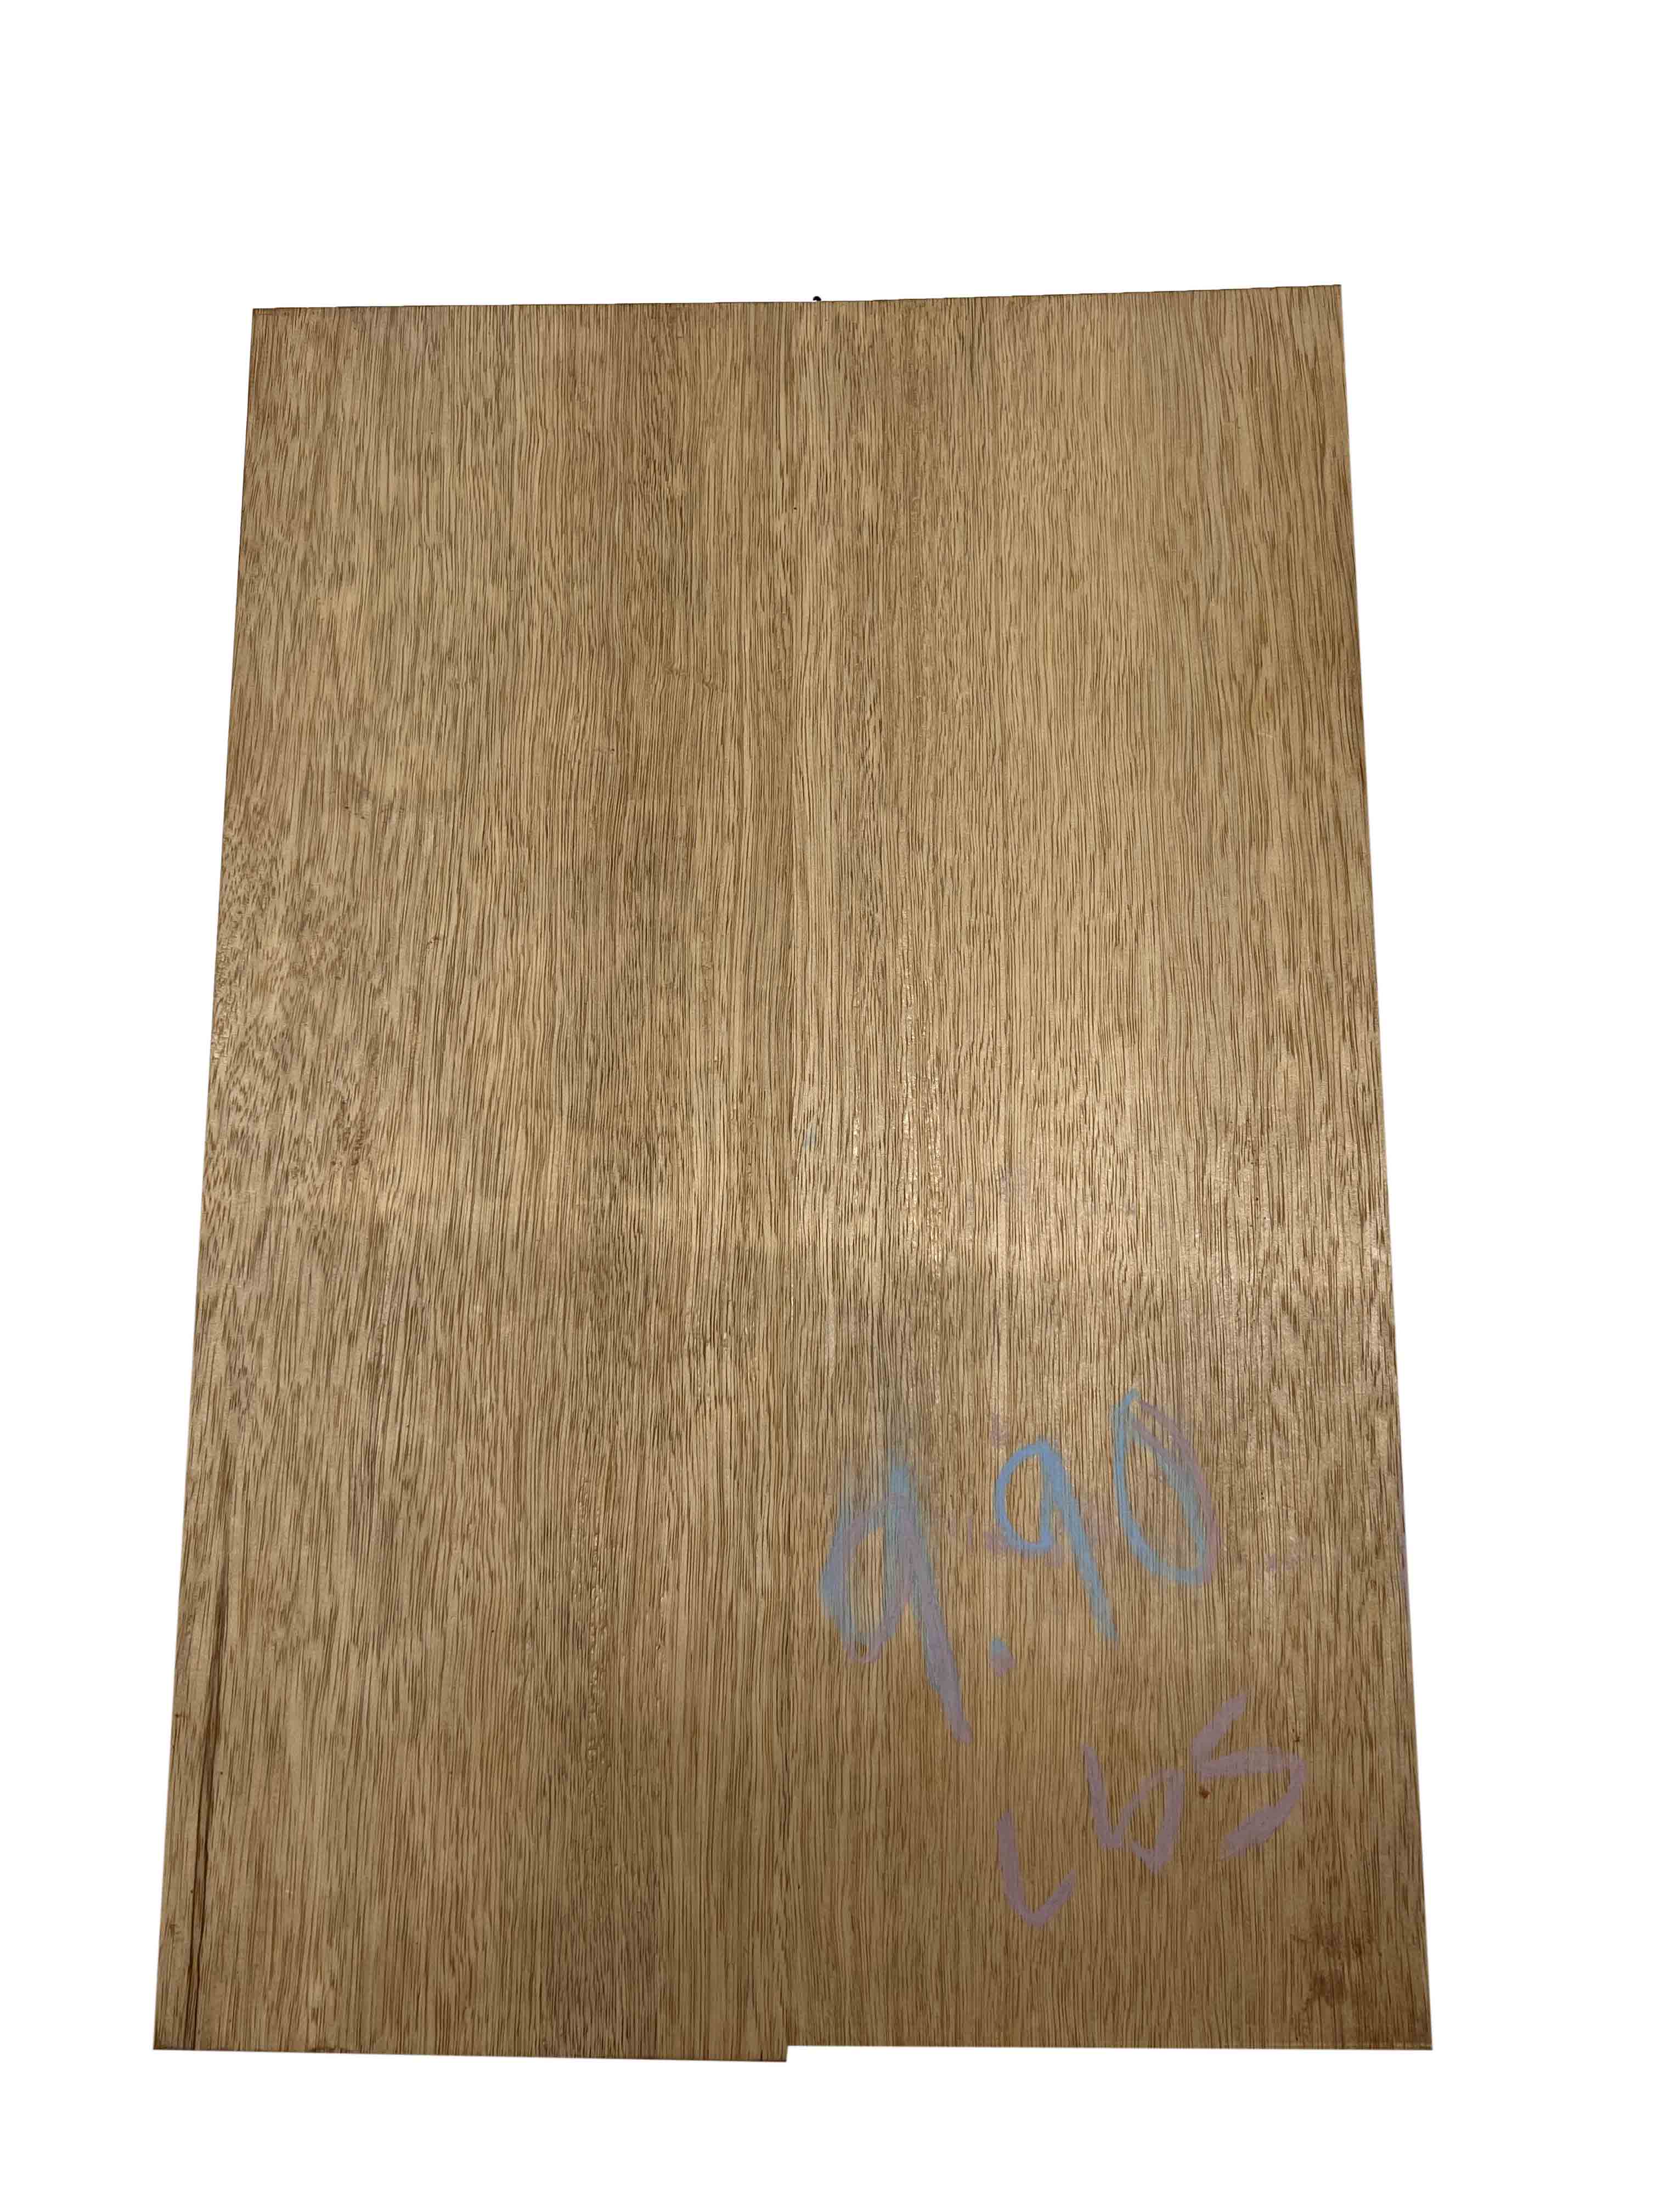 Basswood Thin Stock Lumber Boards Wood Crafts - Exotic Wood Zone